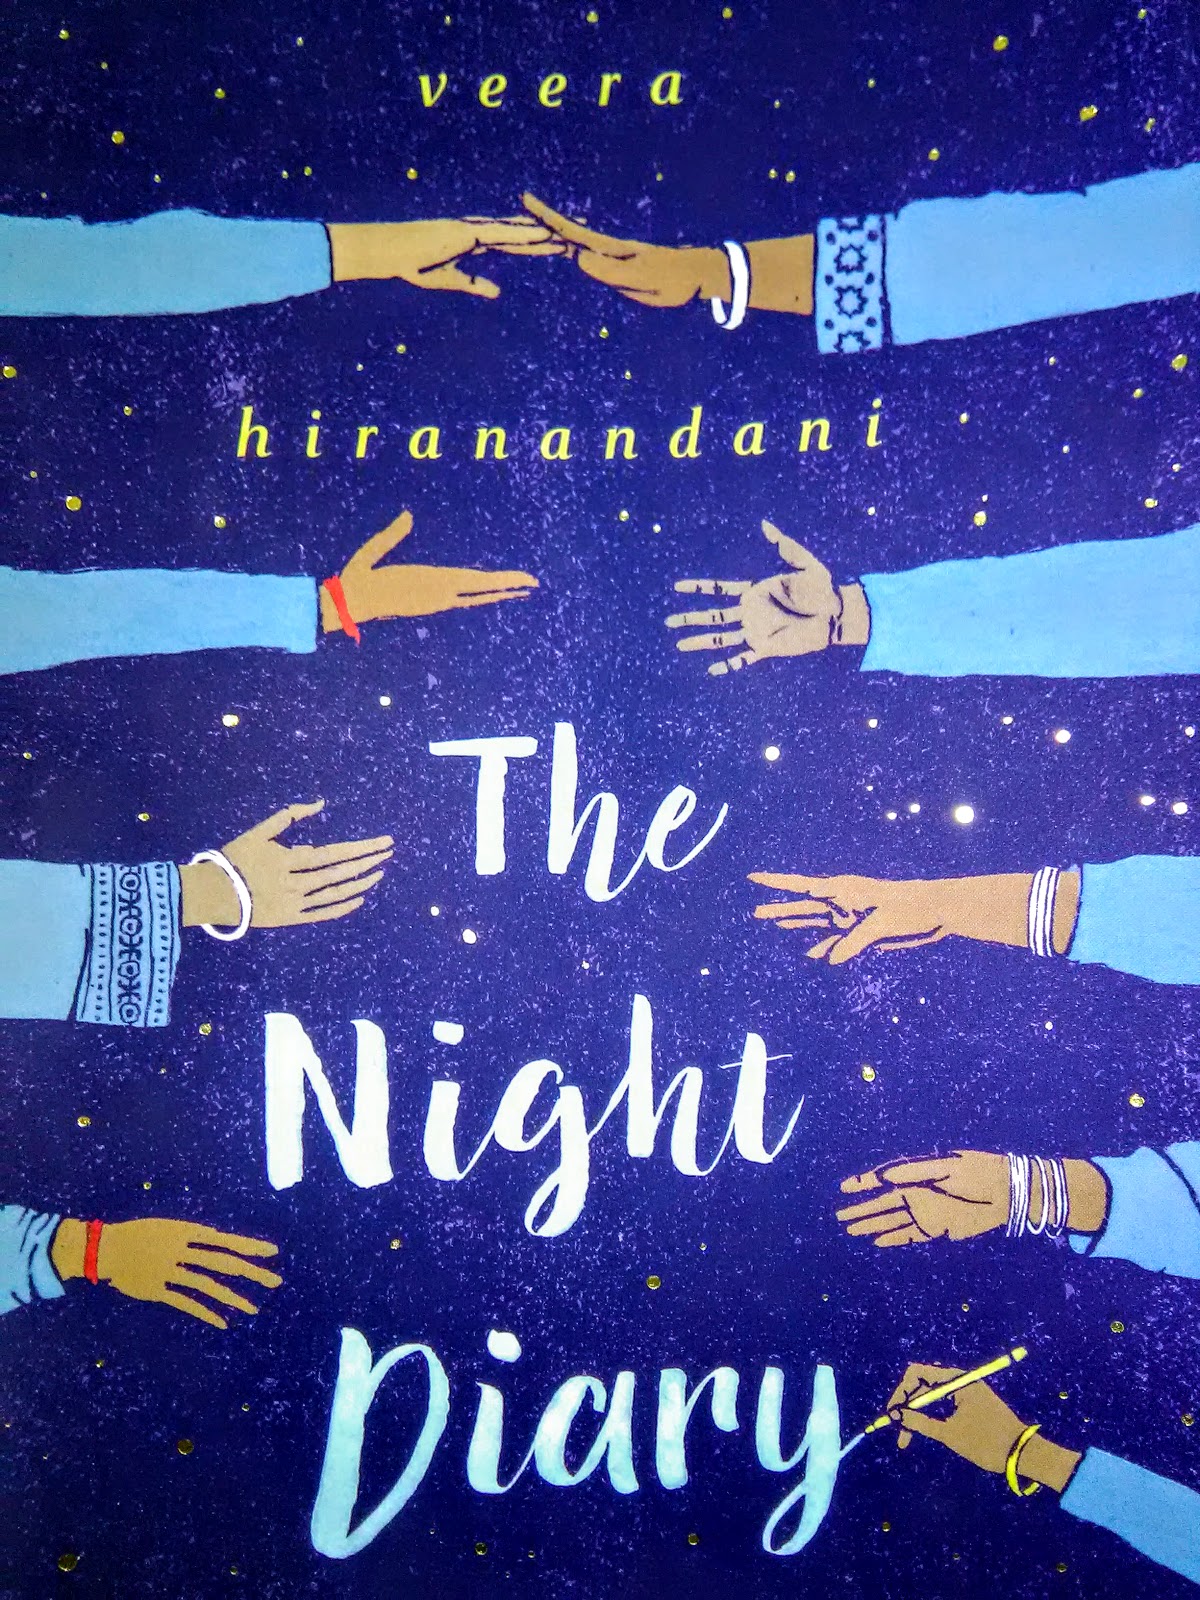 Motivated Parent - Successful Child: Good Book - “The Night Diary” by Veera  Hiranandani – Historical Fiction